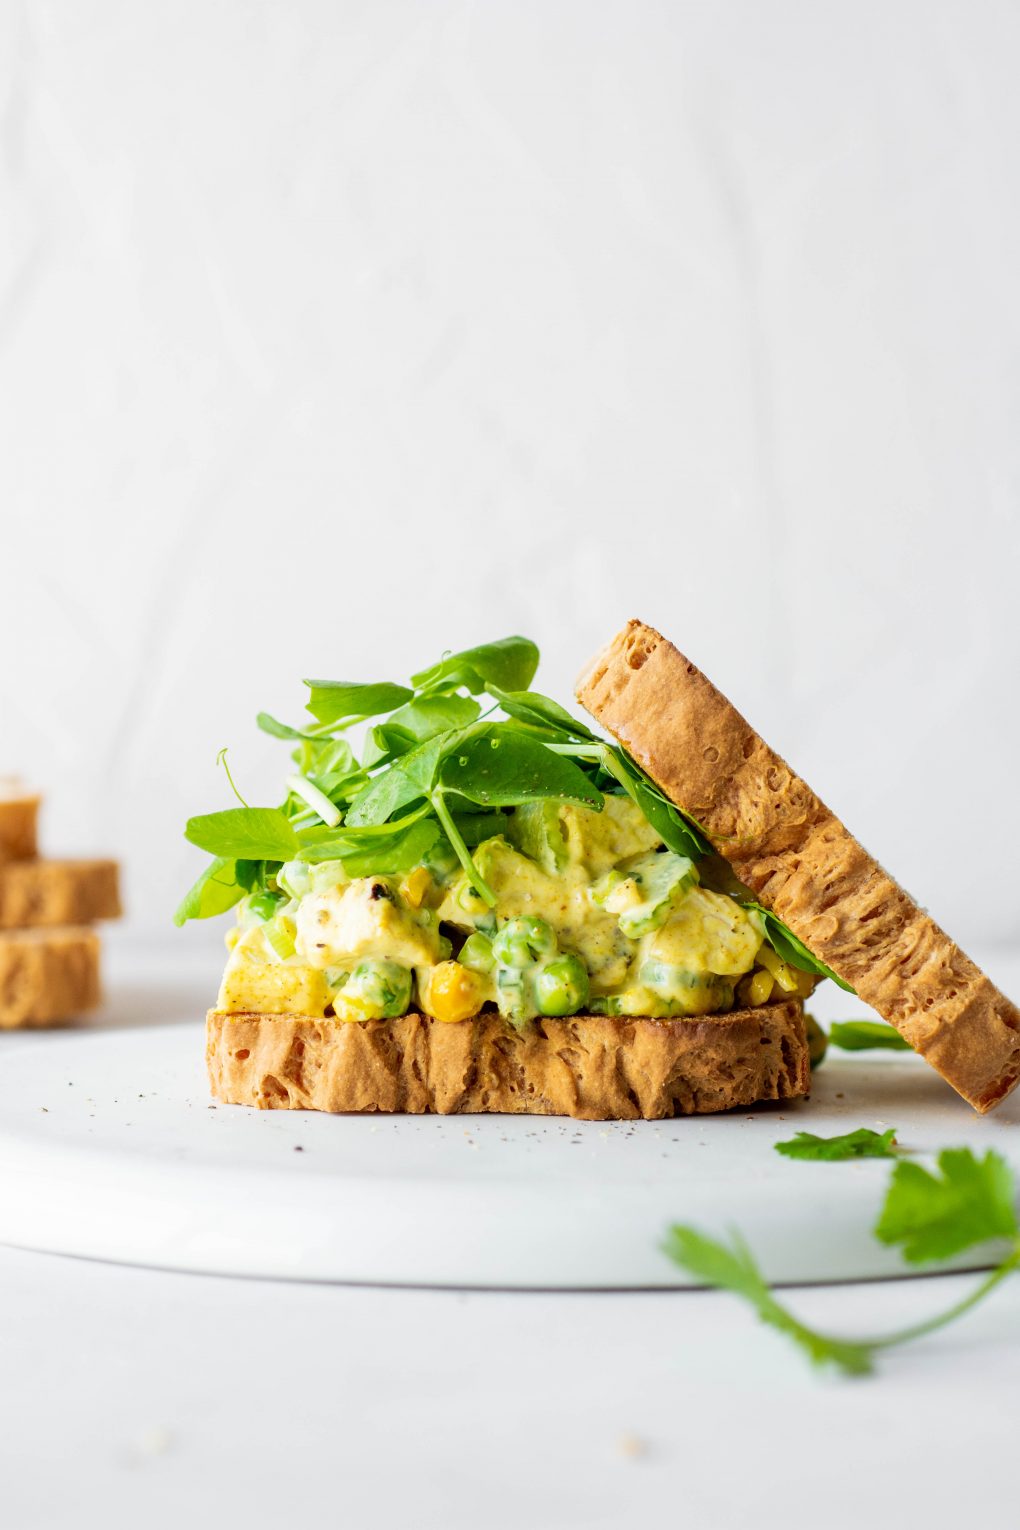 Side view of a curried chicken salad sandwich with some fresh greens and the top piece of bread angled off to the side. On a white background.